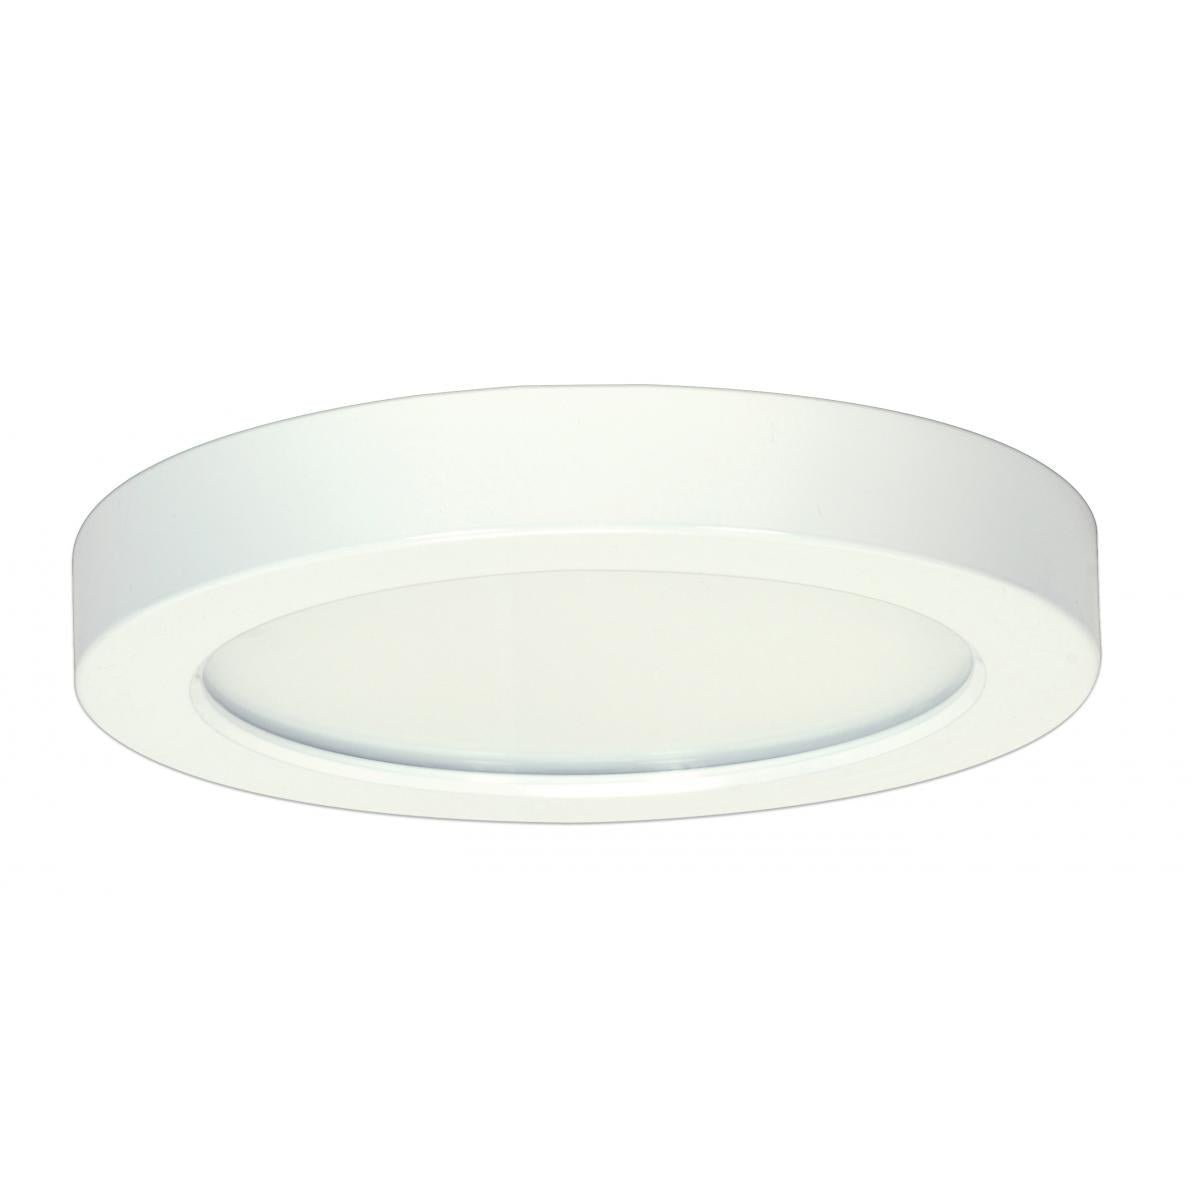 SATCO-S29655SATCO S29655 13.5W 7" Round LED Surface Mount 40K